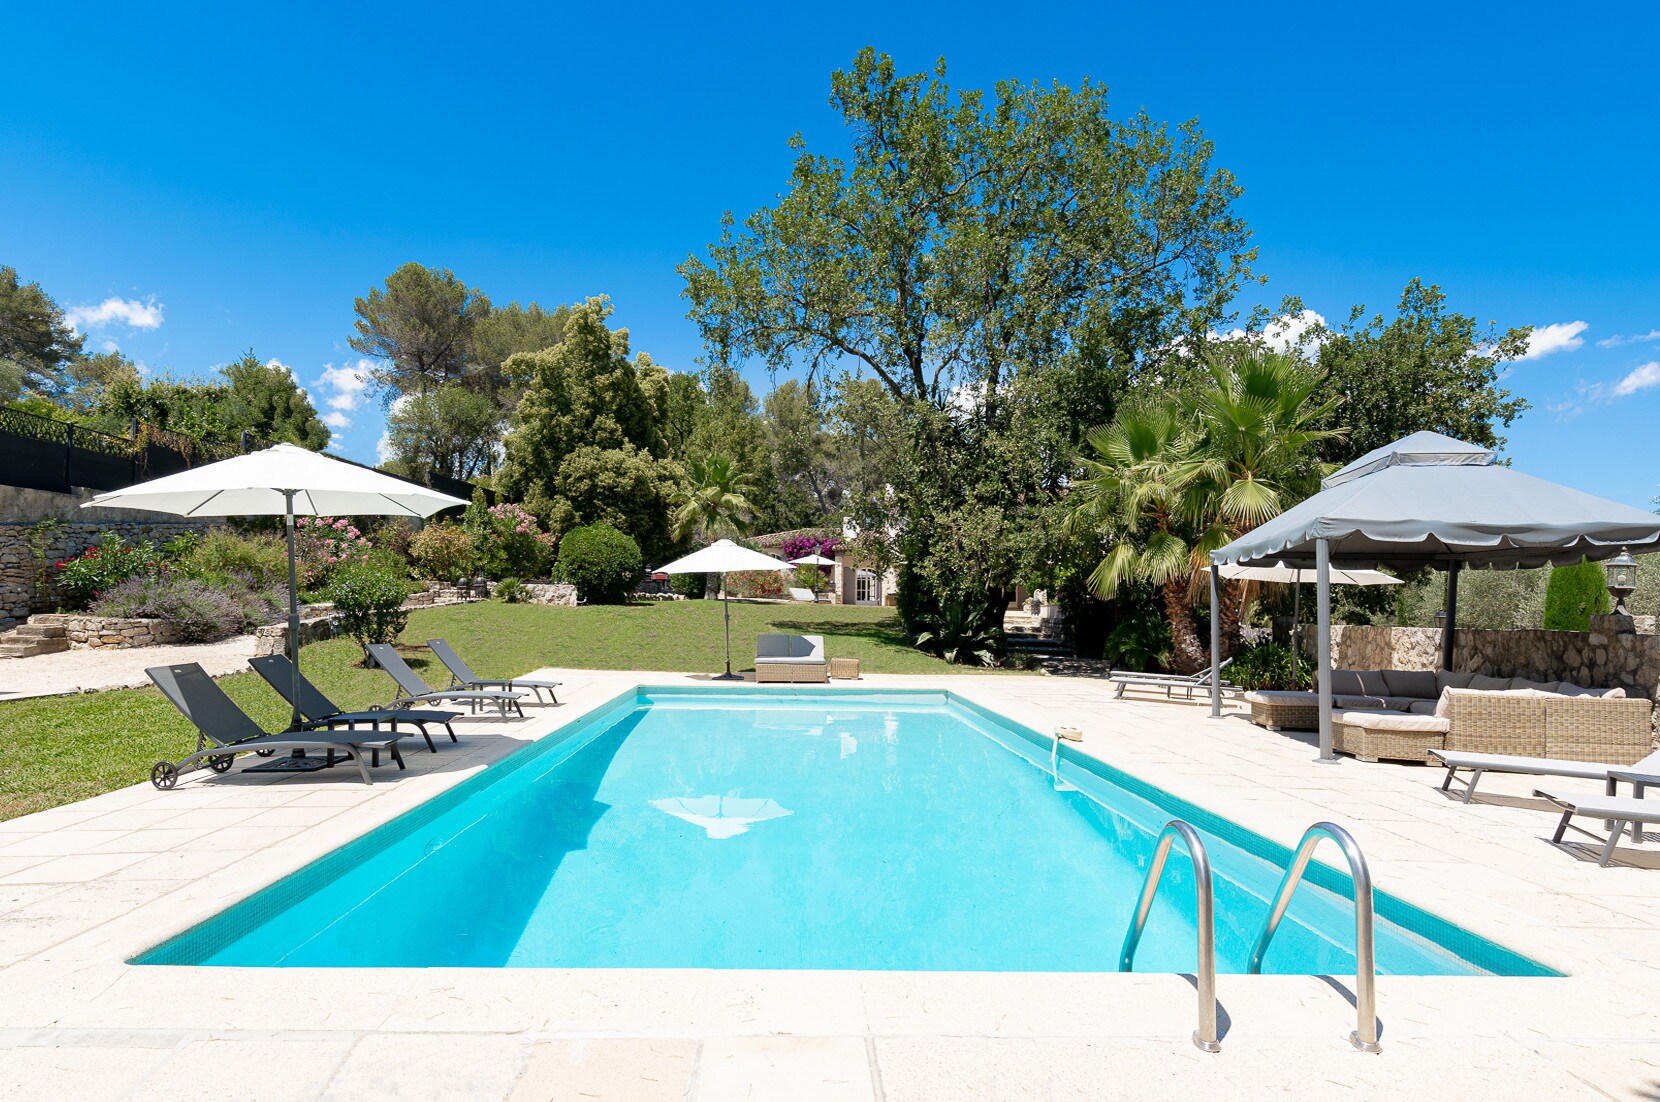 Property Image 2 - Large stone bastide with 6 bedrooms and heated pool, at walking distance to Valbonne village